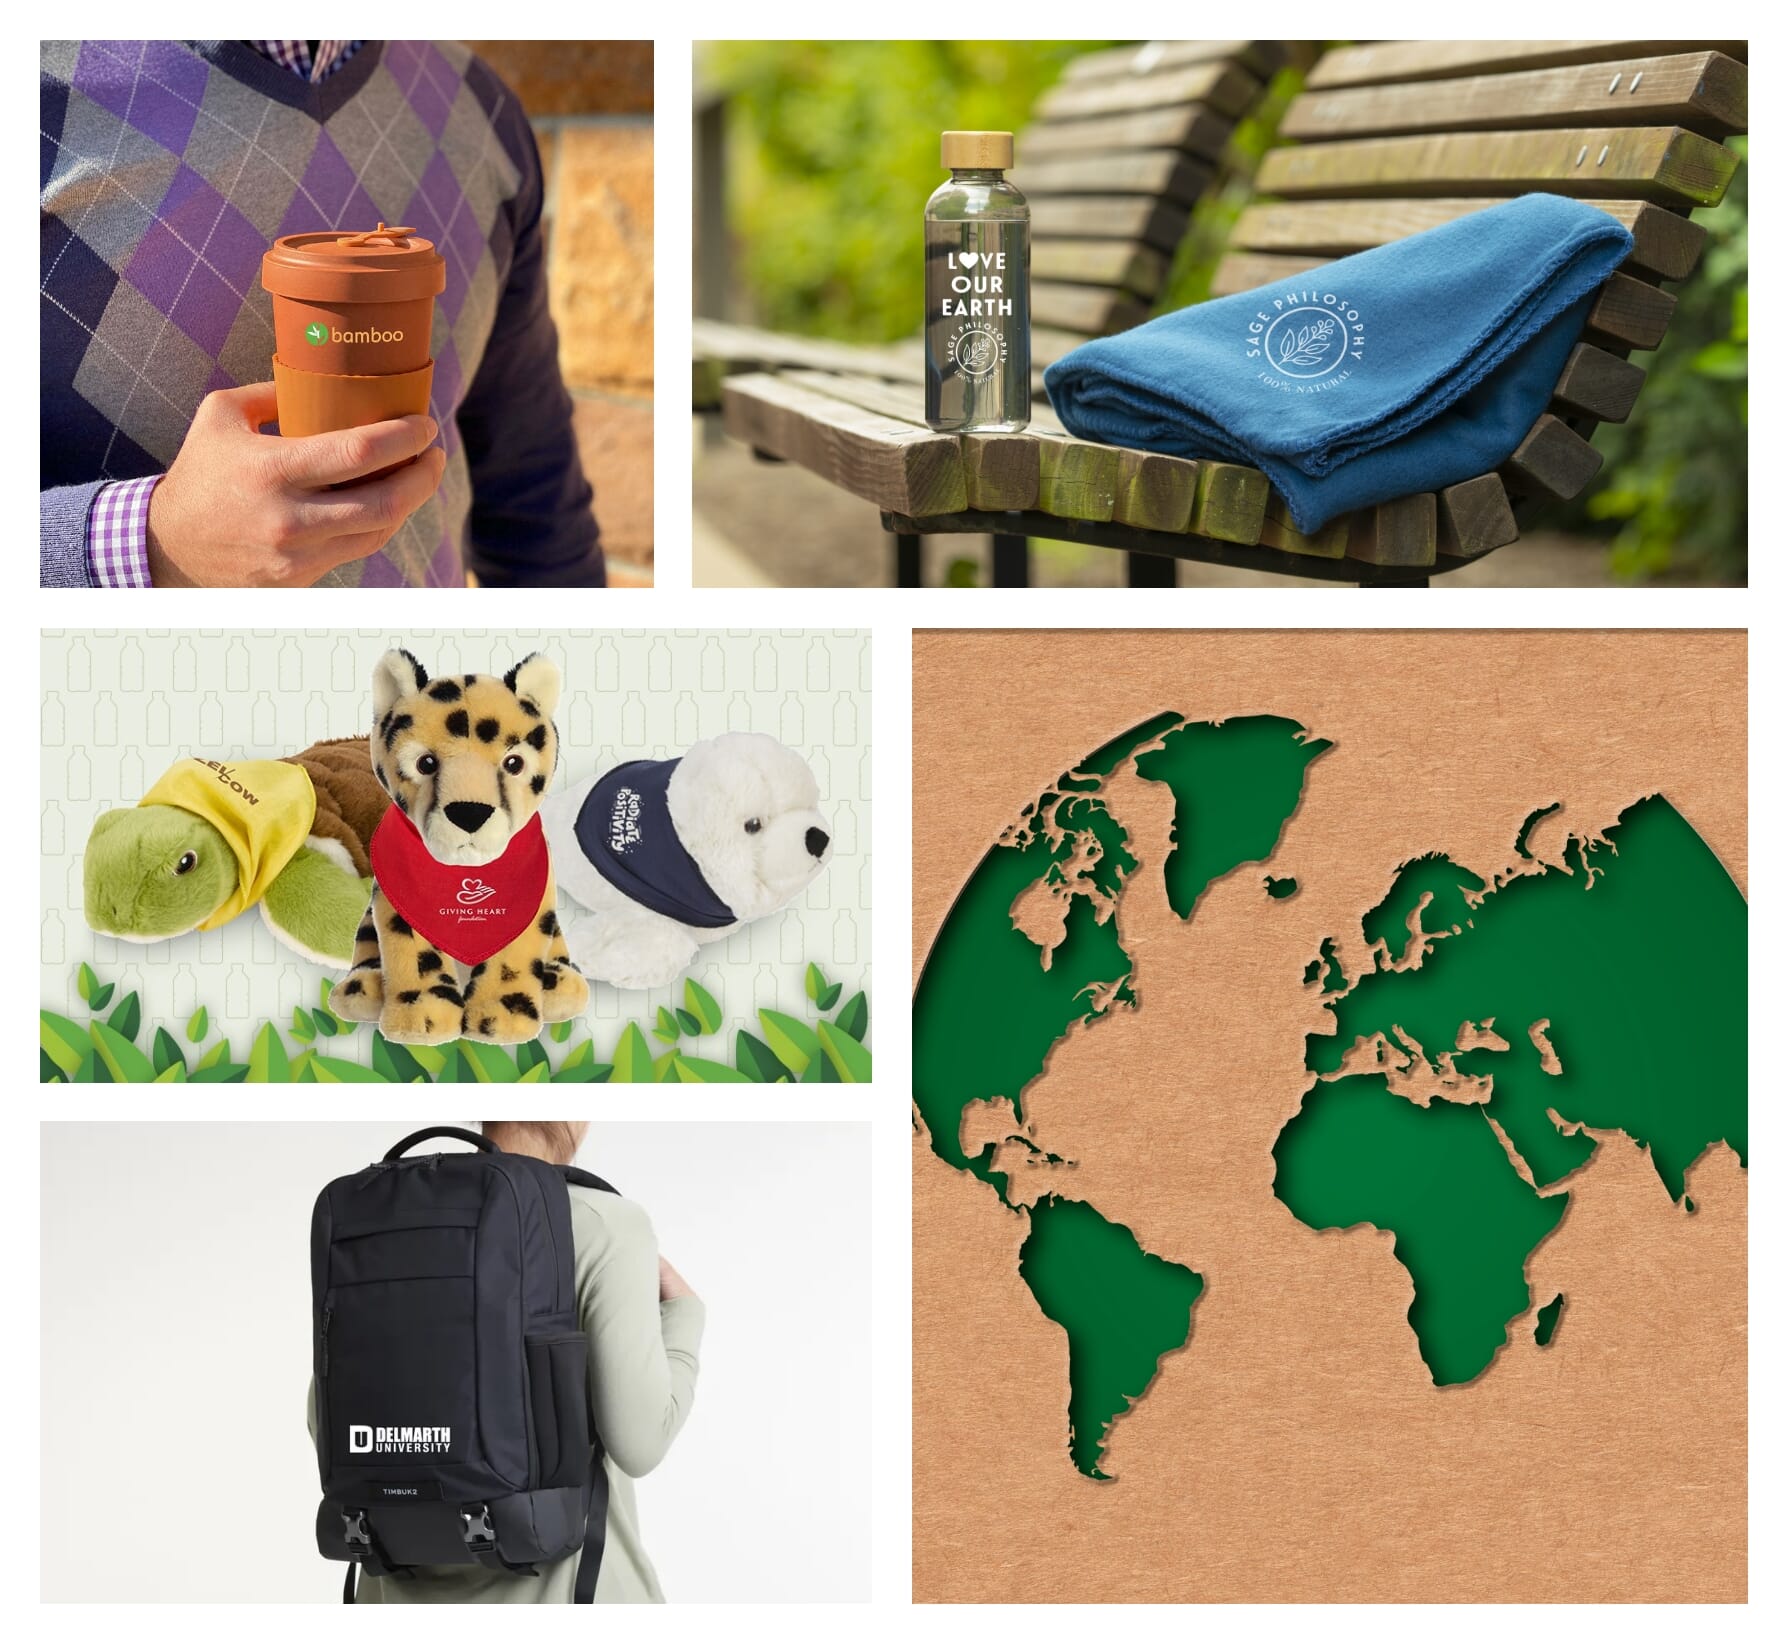 Earth day gifts and giveaways